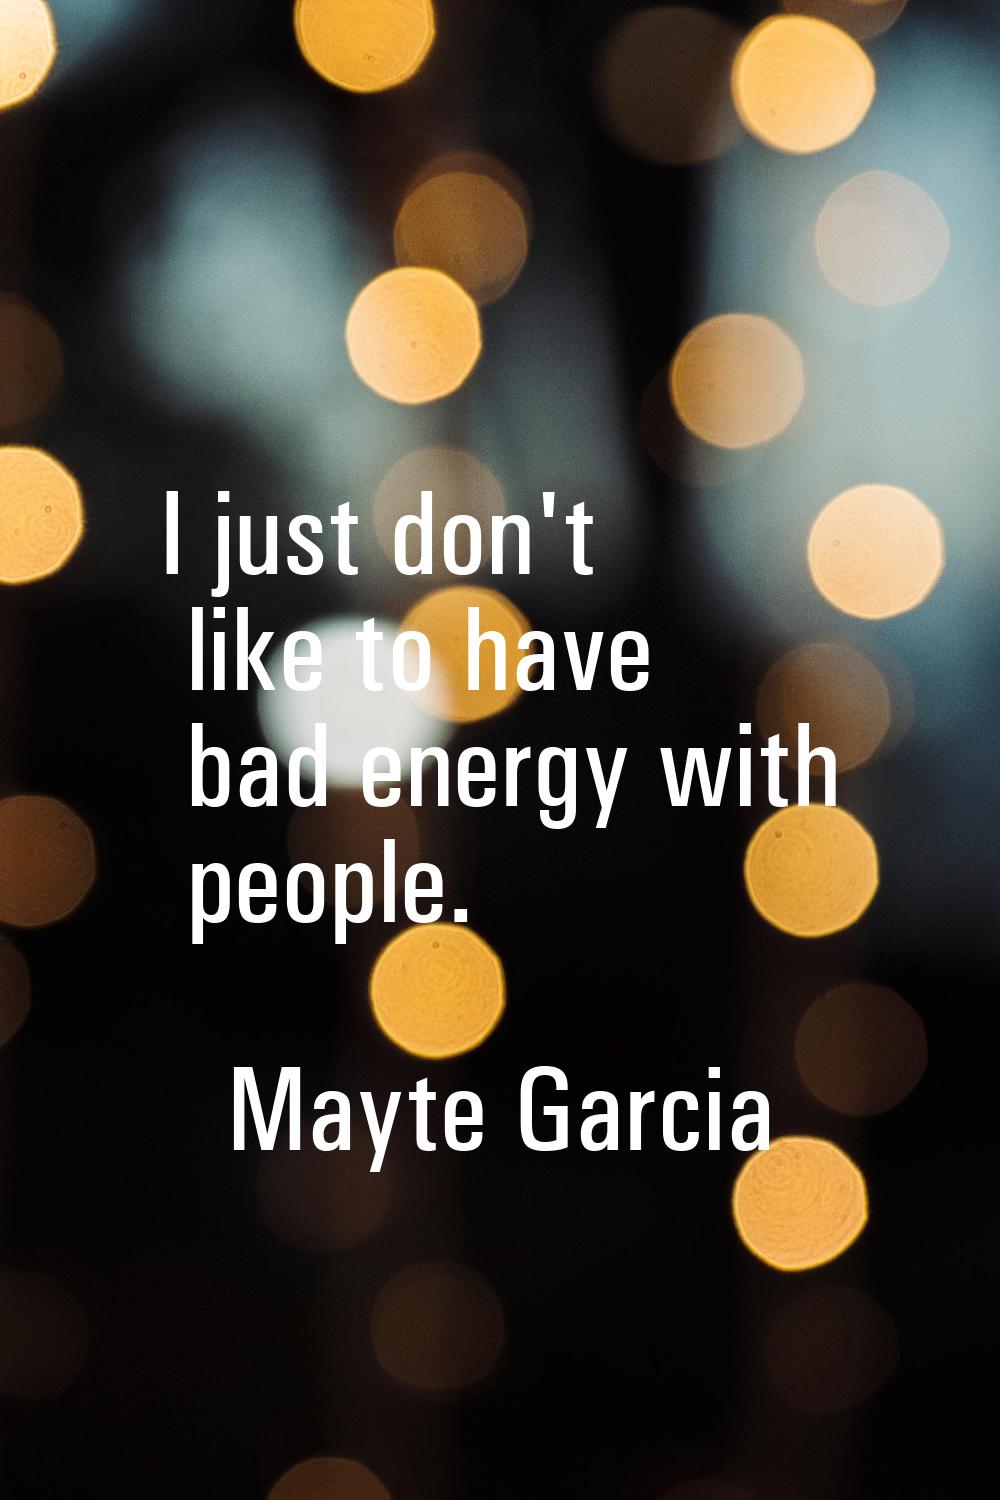 I just don't like to have bad energy with people.